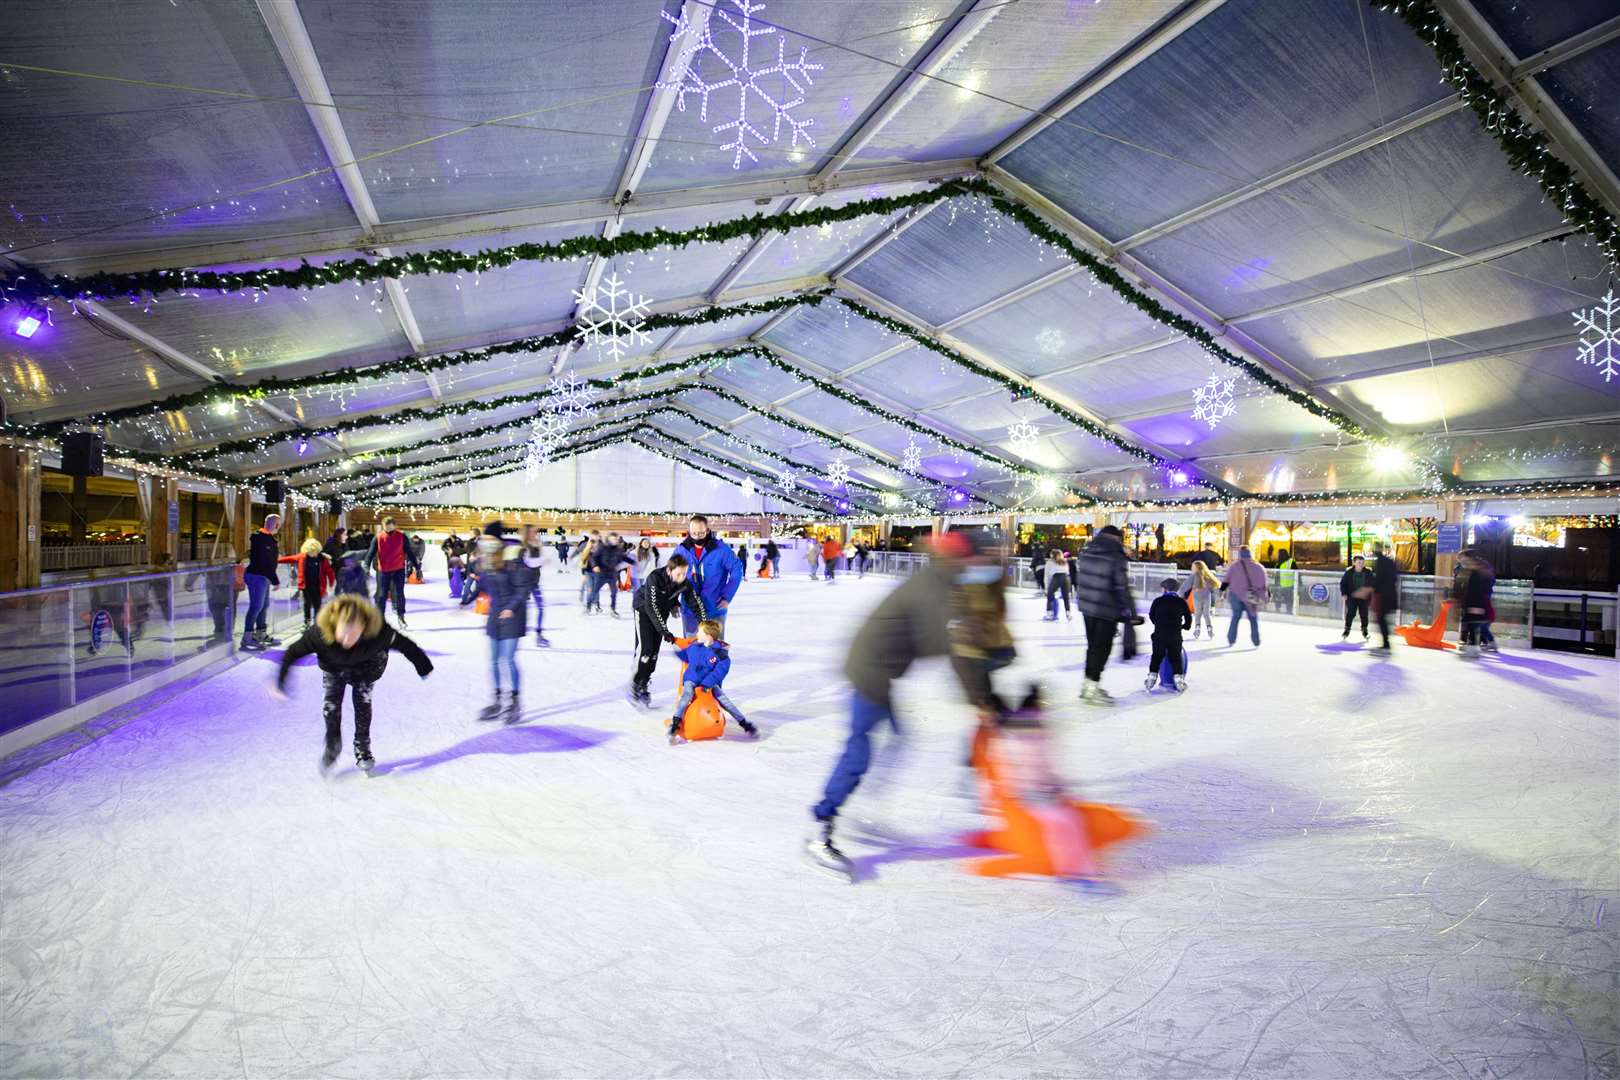 Get your skates on and book a slot at the undercover ice rink. Picture: Bluewater